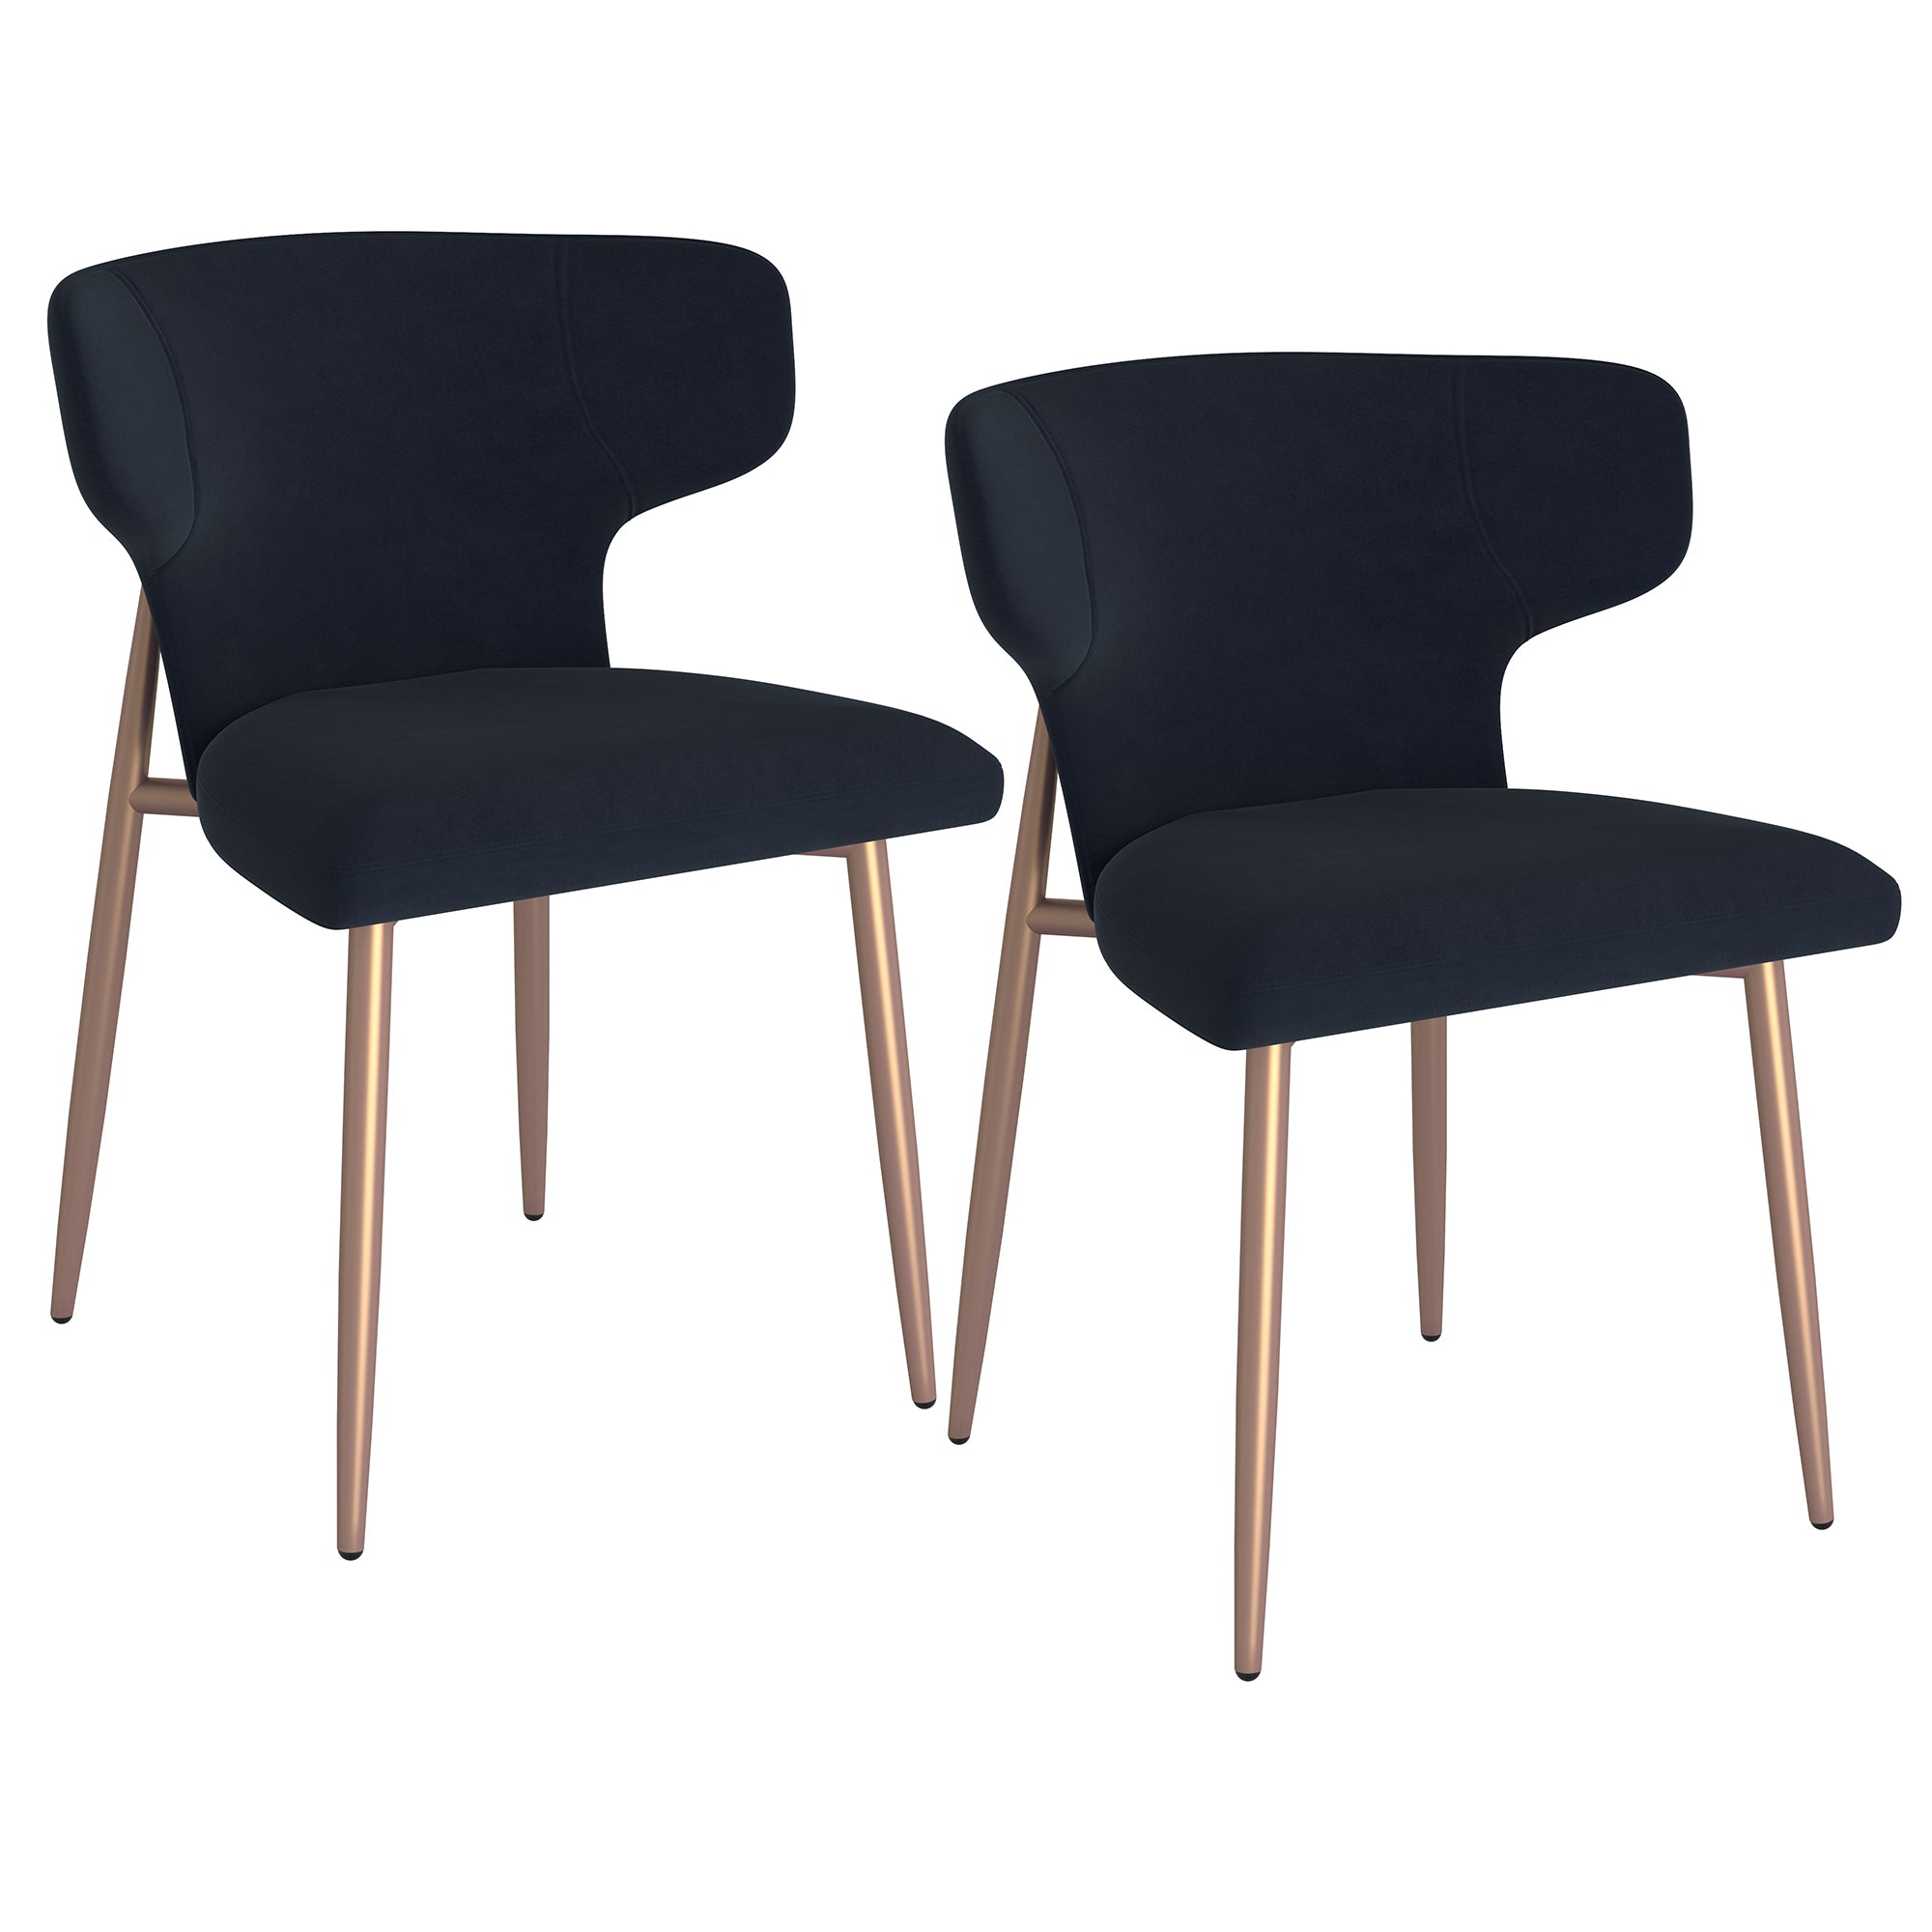 Akira Dining Chair, Set of 2 in Black and Aged Gold